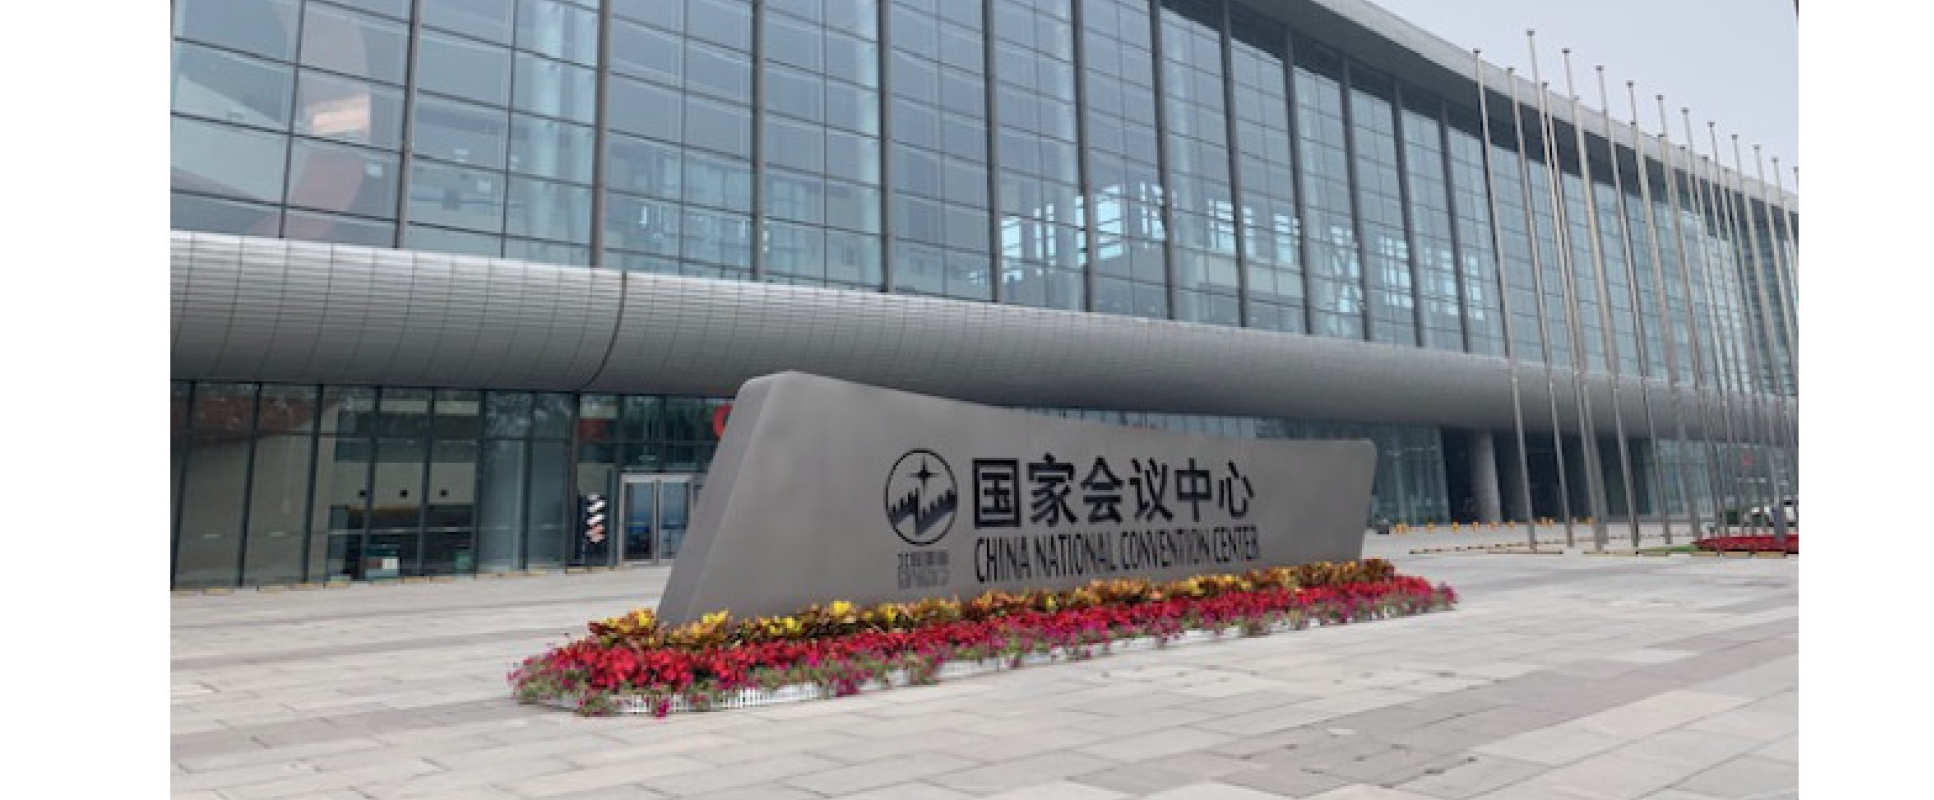 external shot of conference centre in china